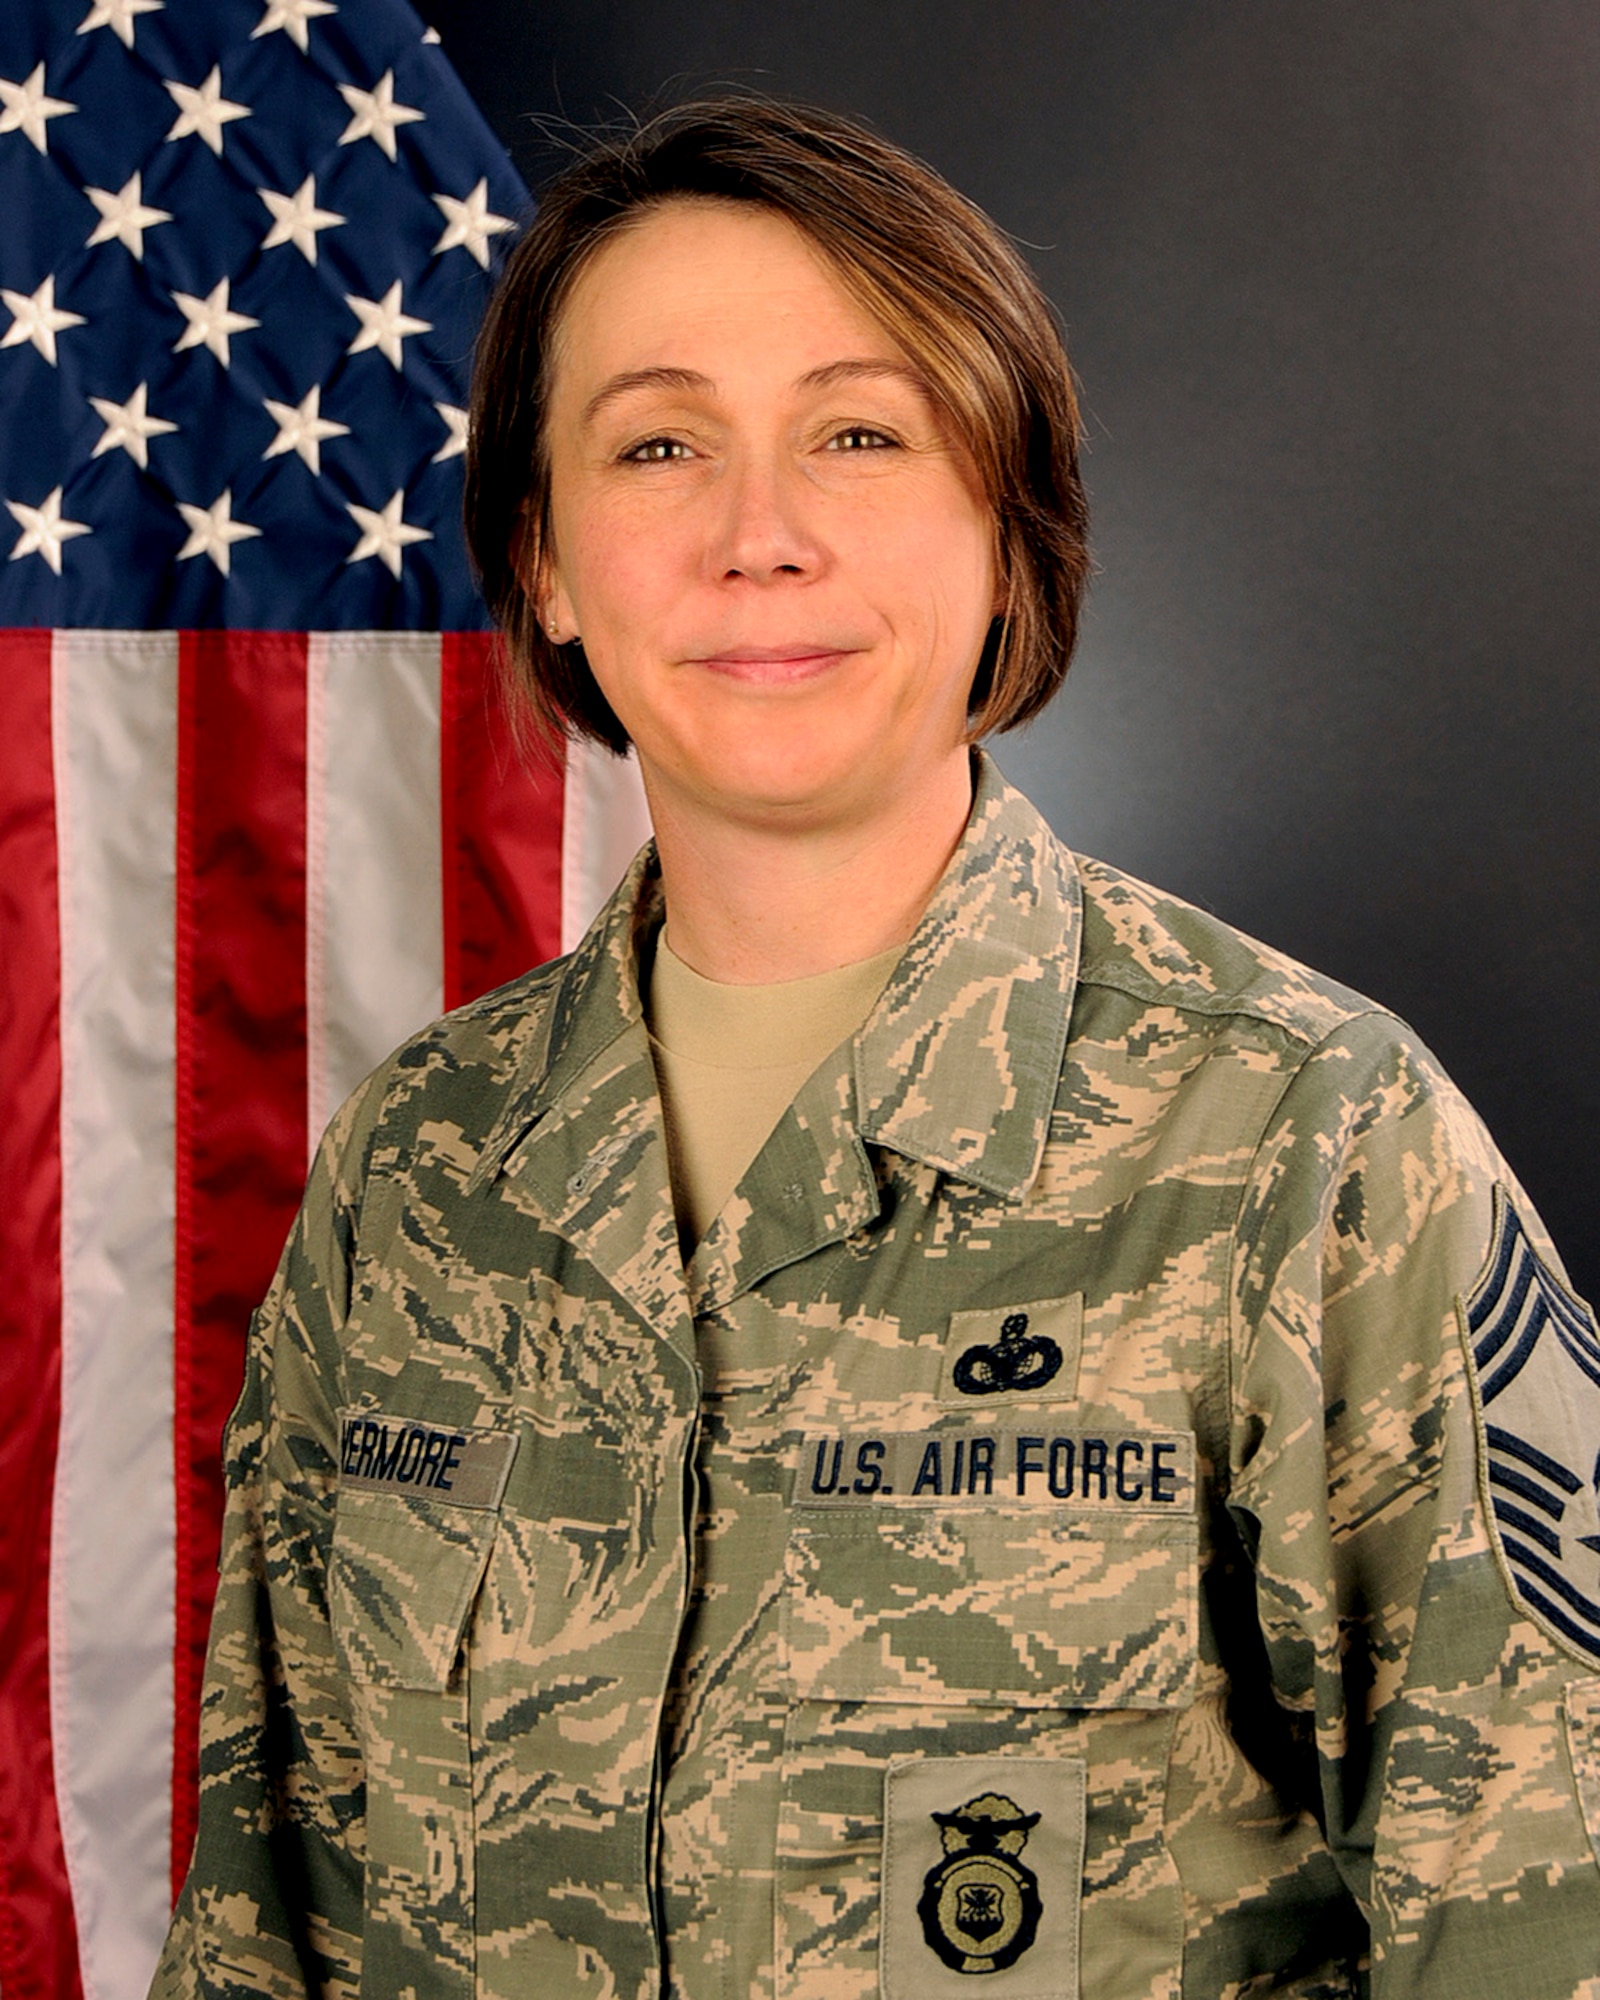 U.S. Air Force Chief Master Sgt. Kristy Livermore with the 169th Security Forces Squadron, South Carolina Air National Guard, Feb. 27, 2015.  (U.S. Air National Guard photo by Tech. Sgt. Caycee Watson/Released)